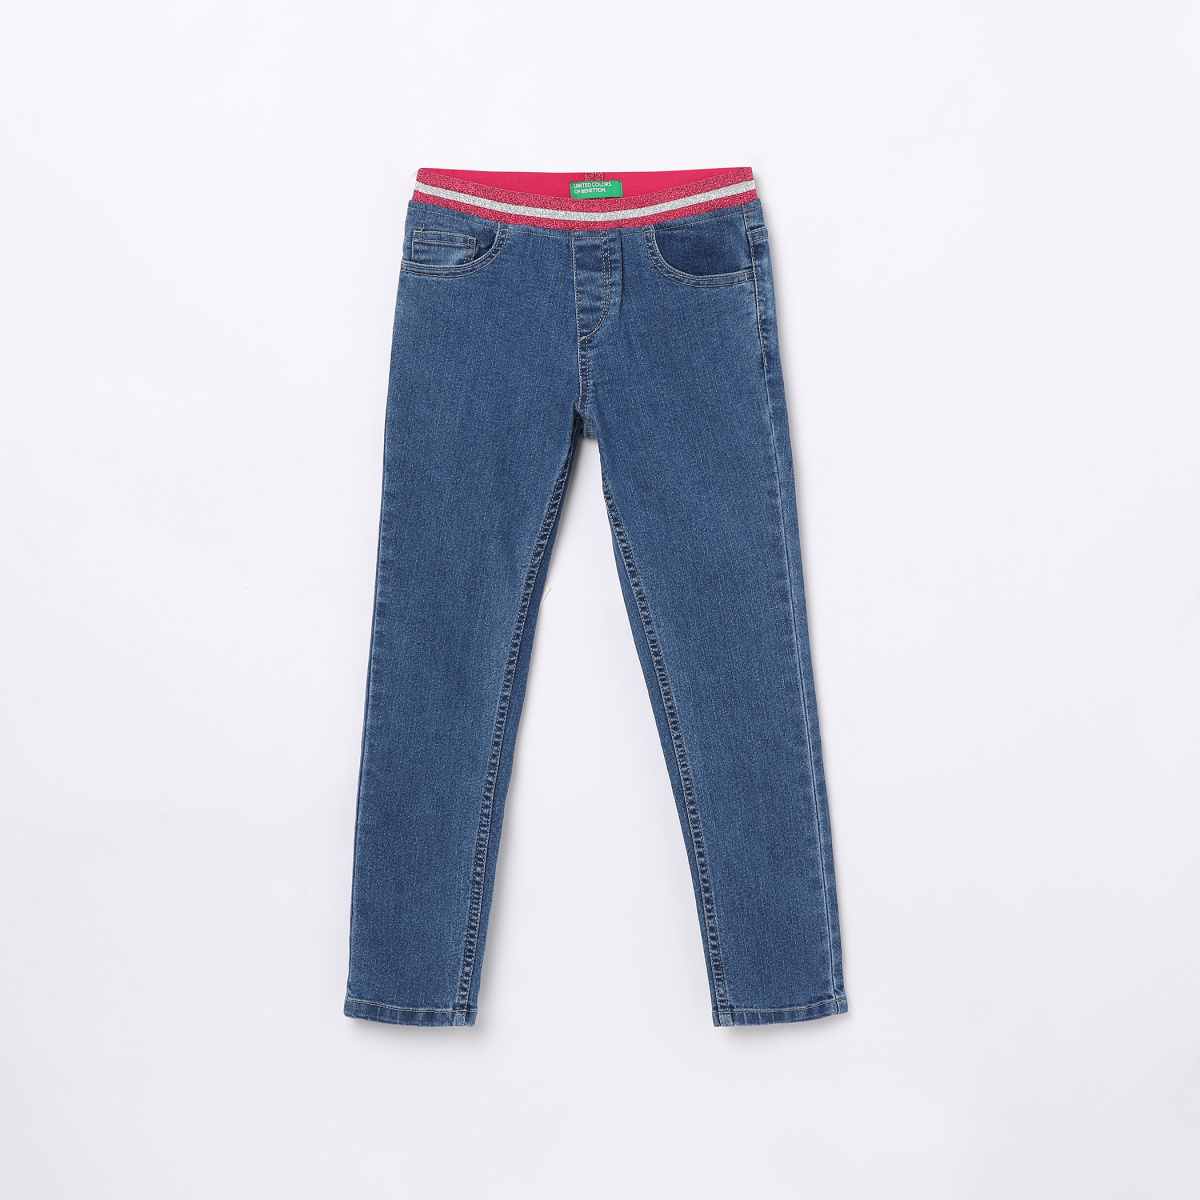 UNITED COLORS OF BENETTON Girls Solid Jeans